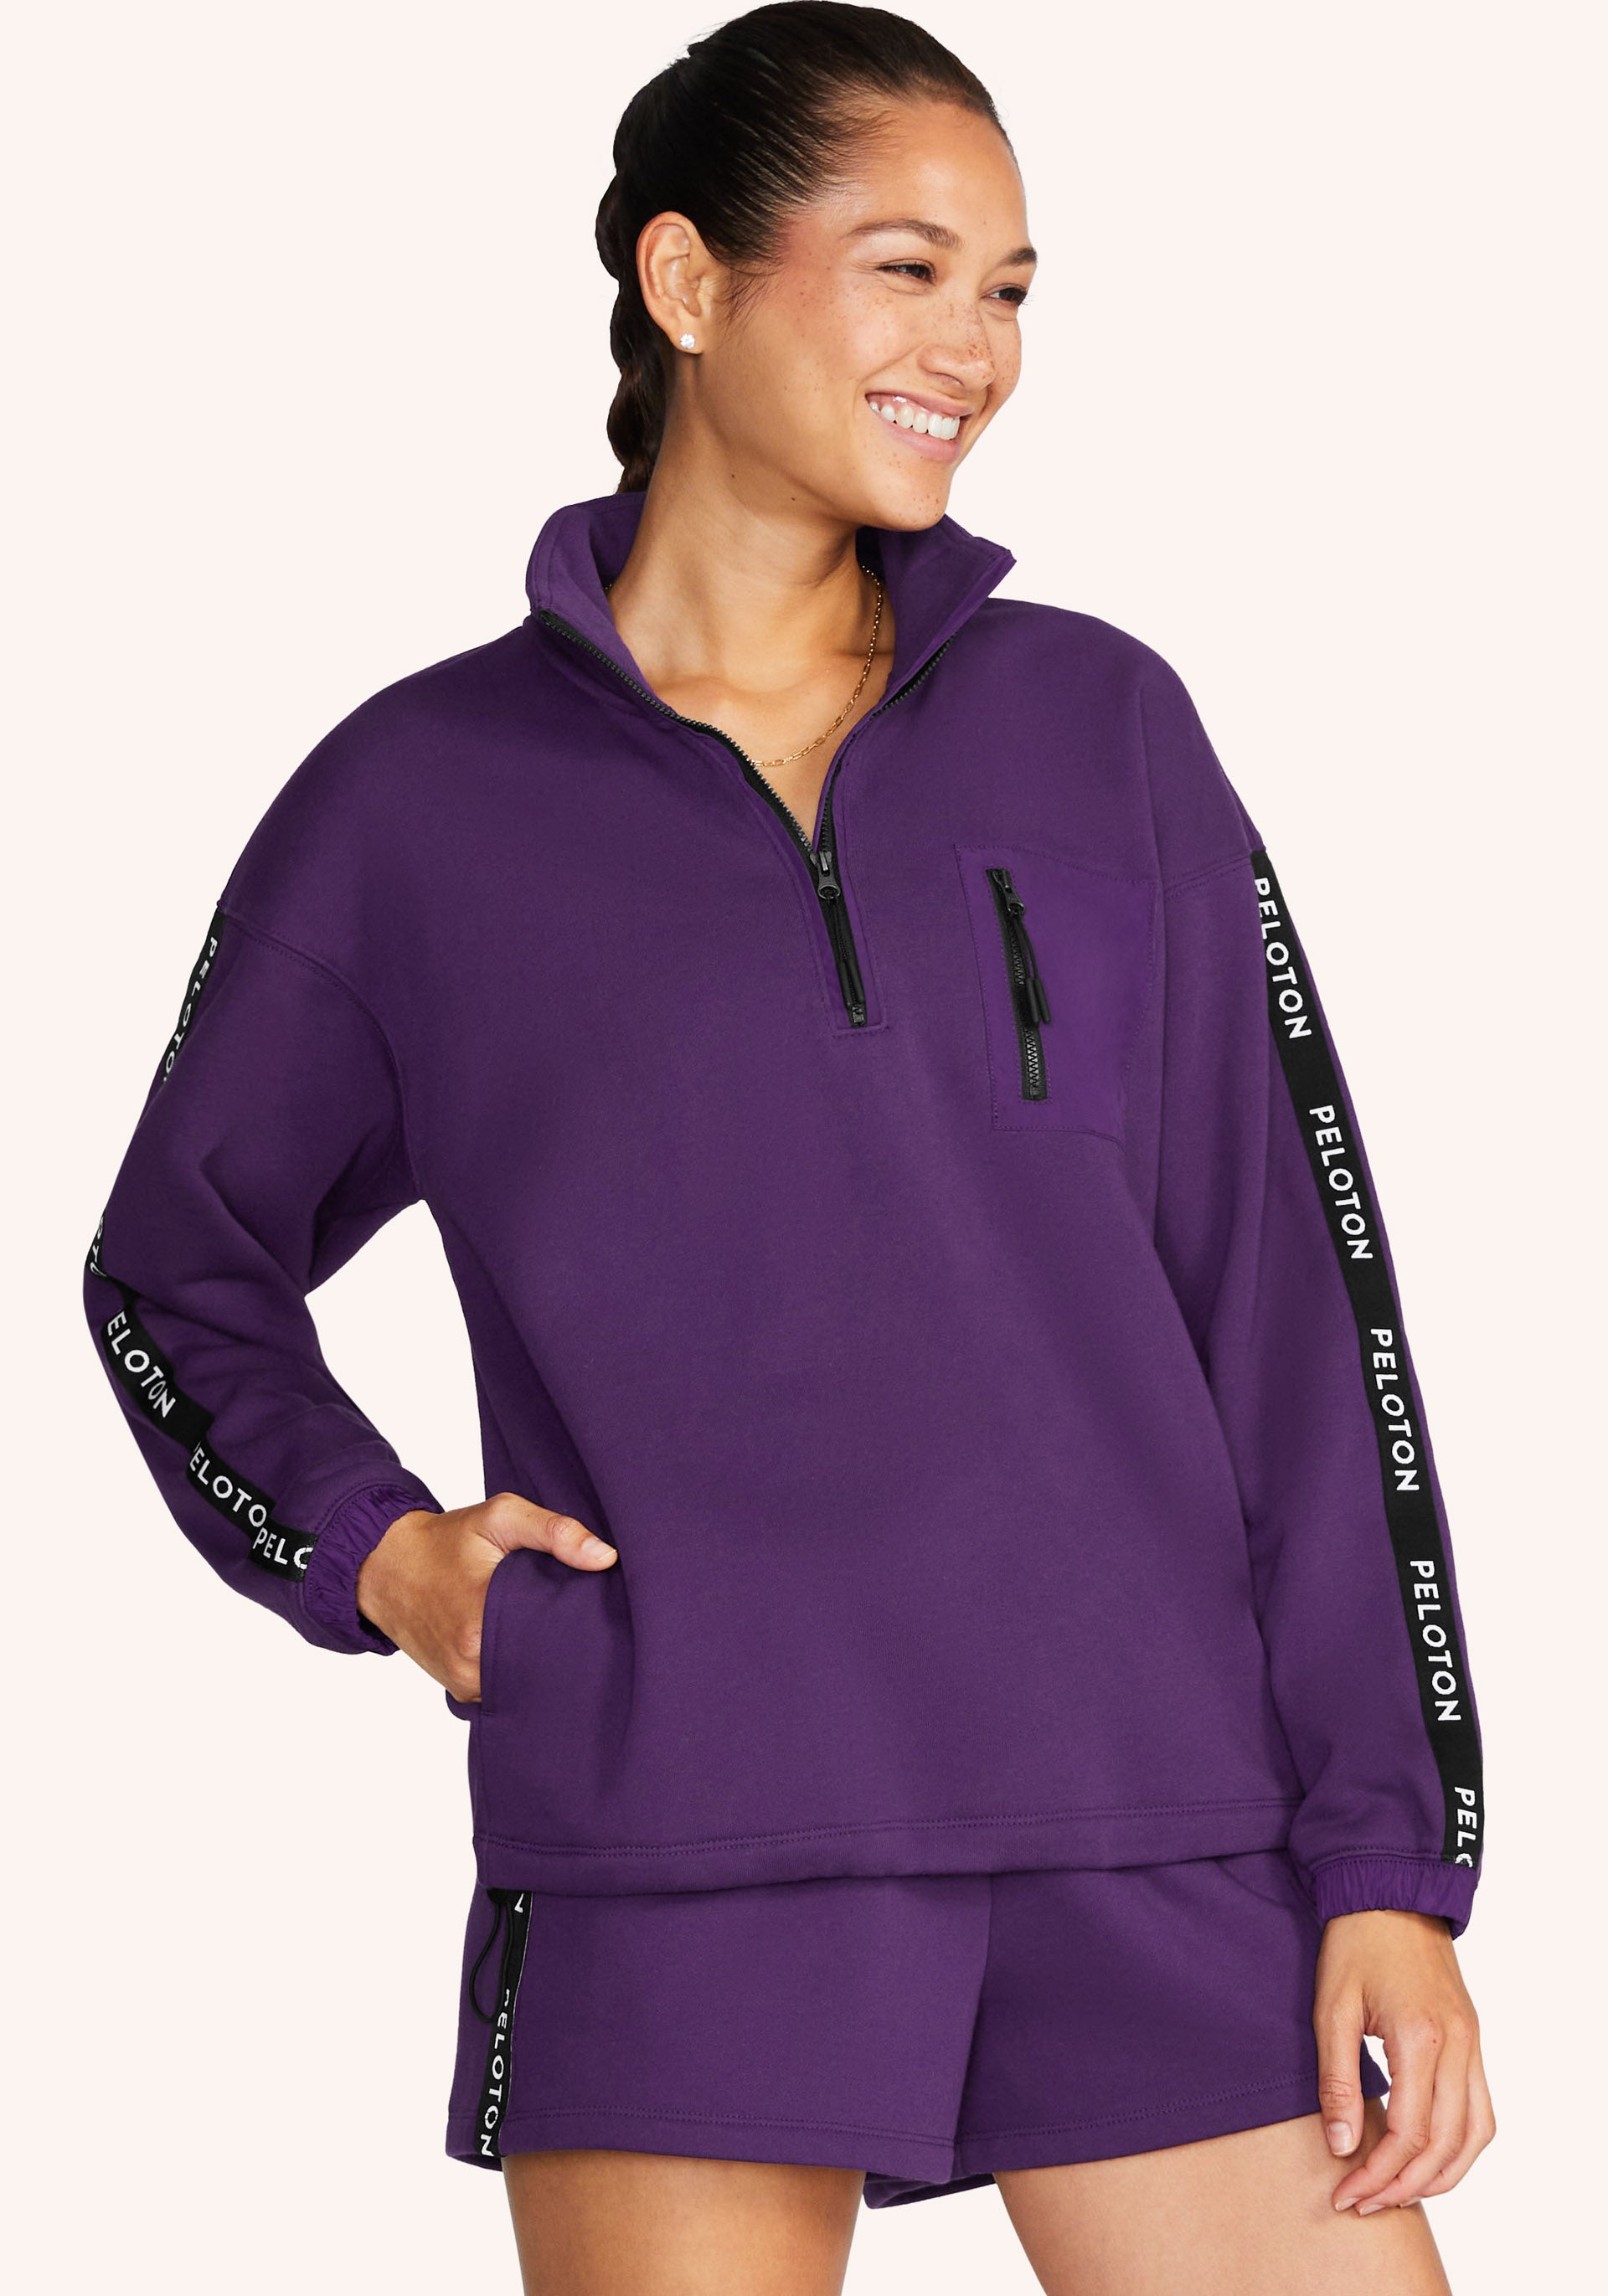 Lululemon Pink Scuba Hoodie Size XS - $70 (39% Off Retail) - From